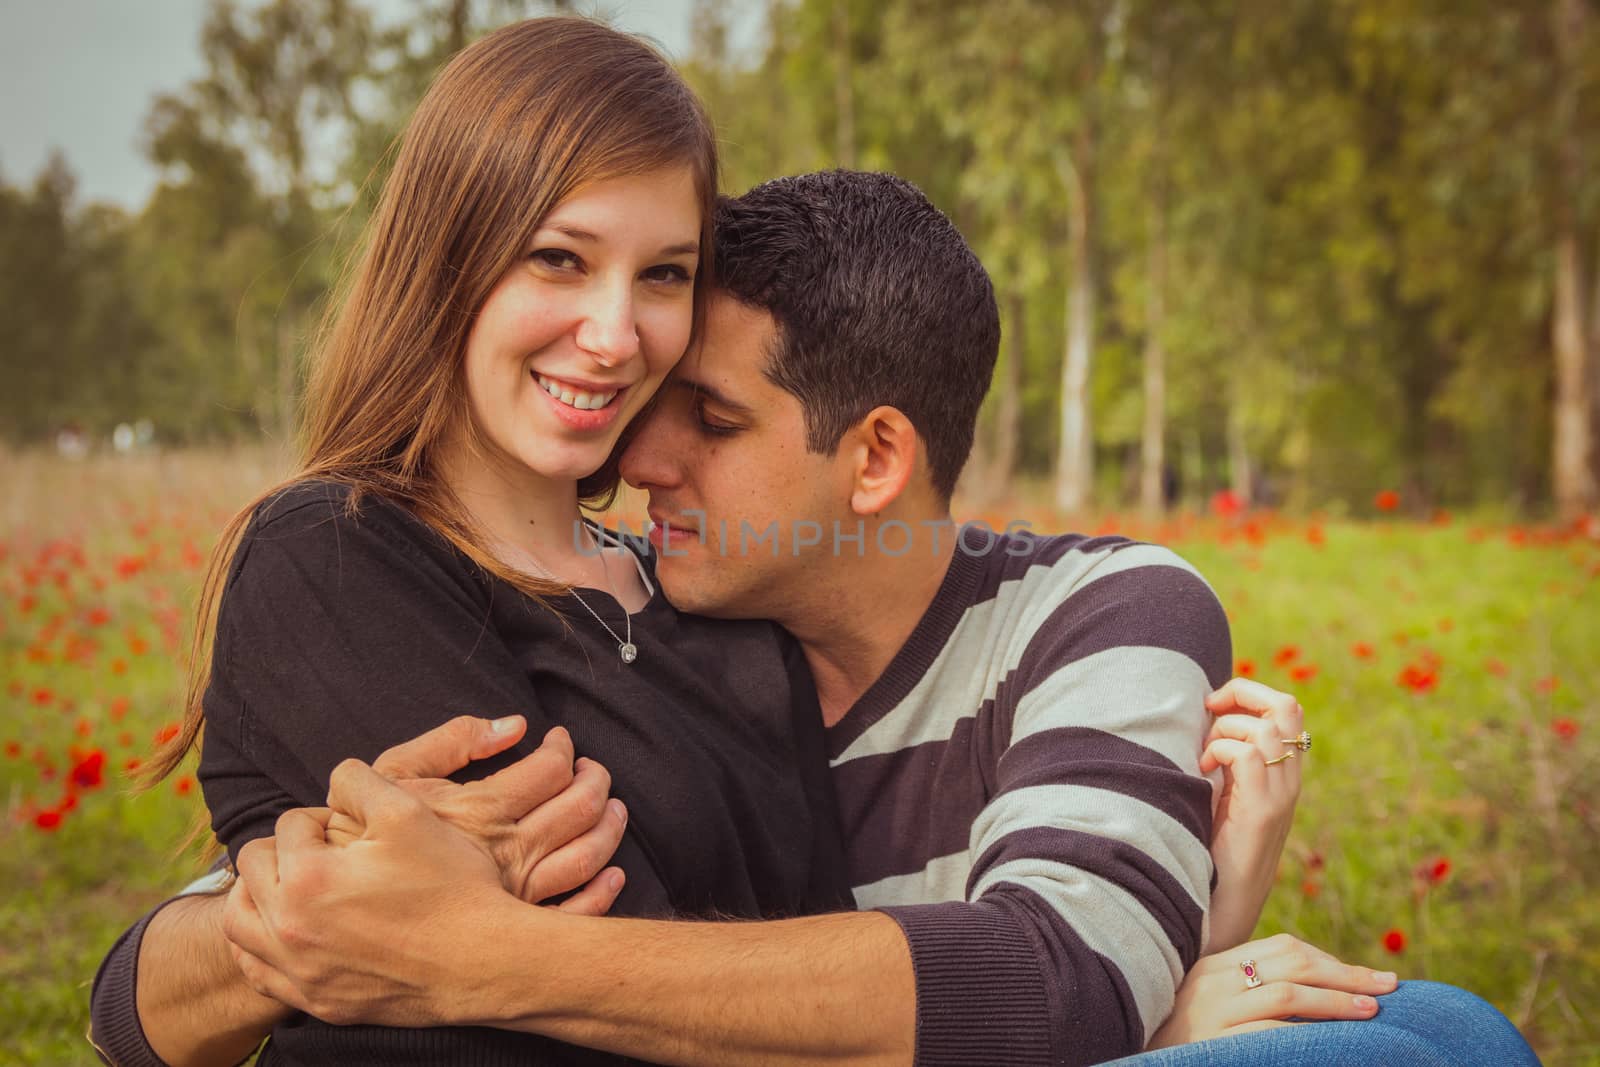 Young couple sitting on the grass in a field of red poppies and smiling at the camera.